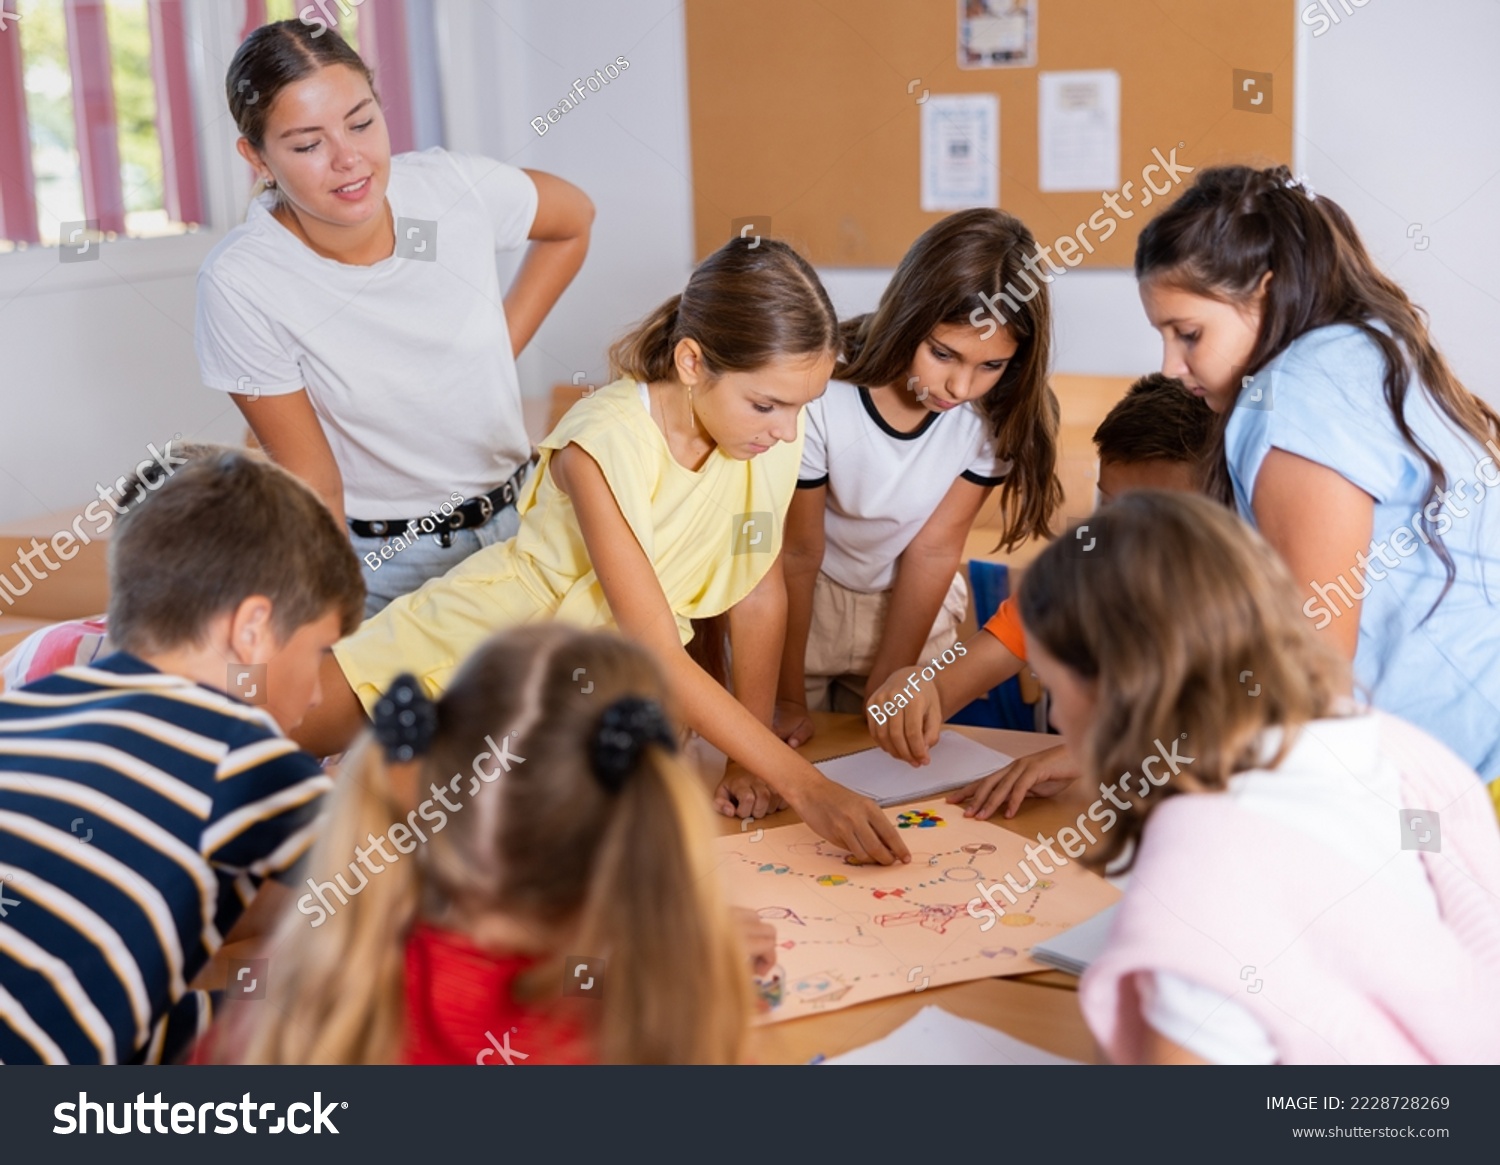 Group of interested school kids with female teacher sitting together around desk in classroom, playing educational tabletop game #2228728269